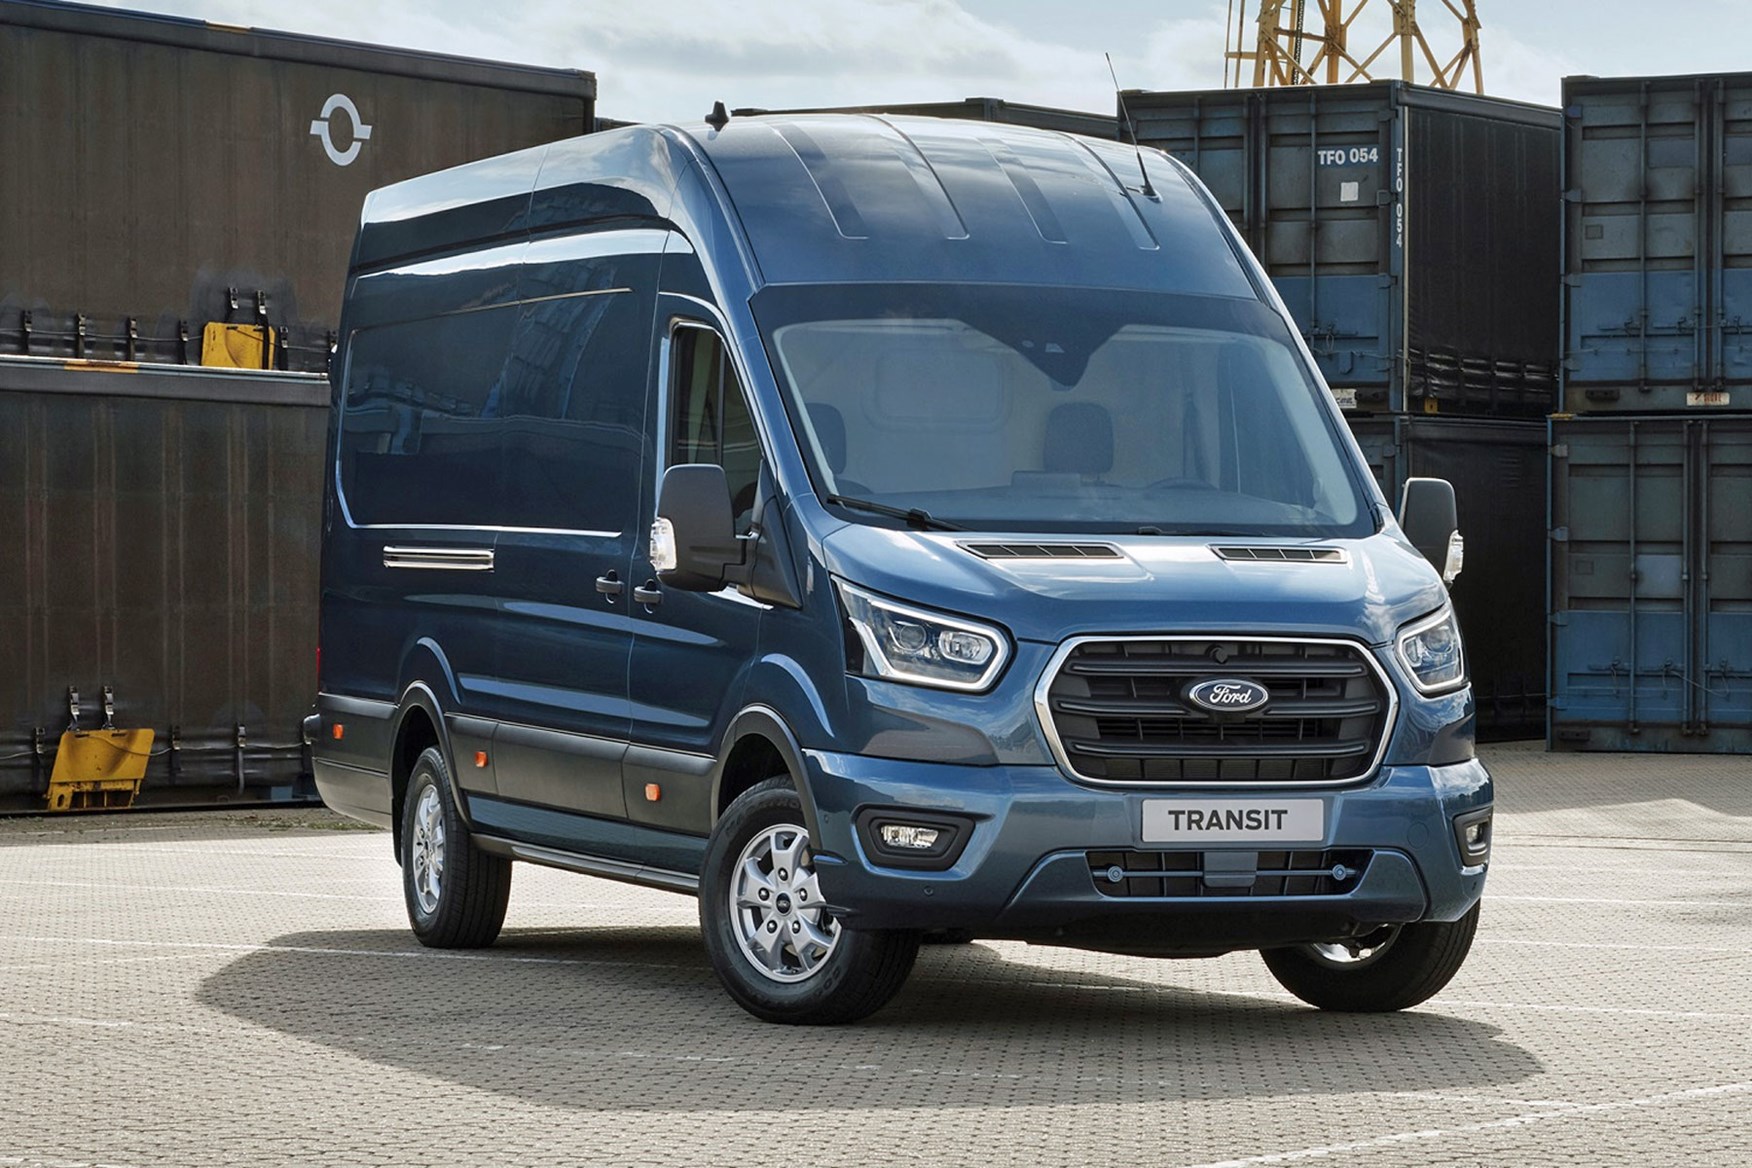 Ford Transit 2019 facelift - front view, blue